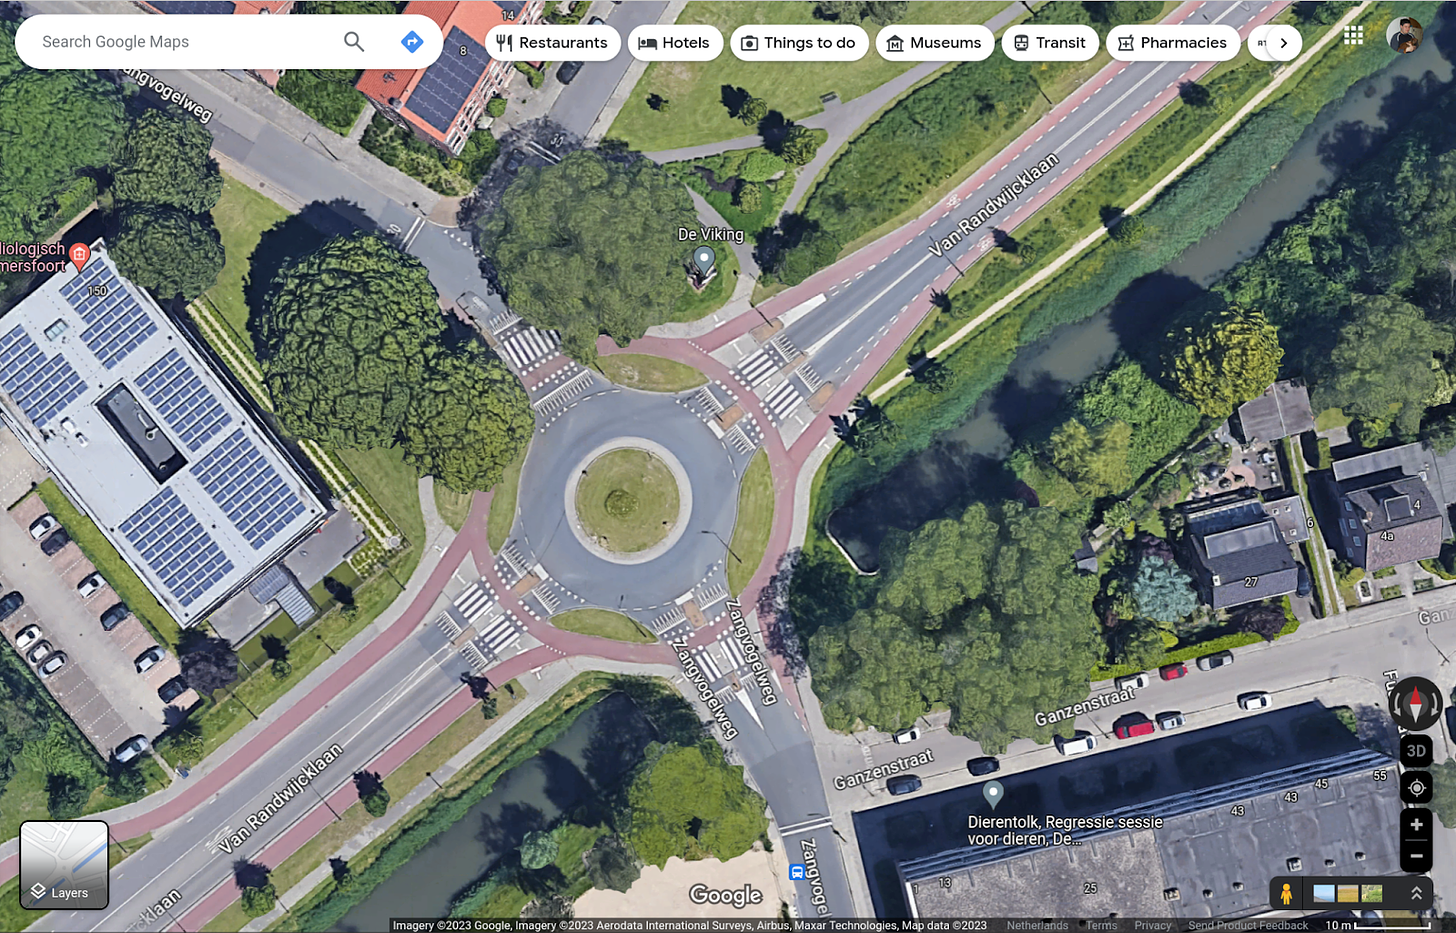 A Google maps satellite view screenshot showing a large traffic circle with a red protected cycleway around it. To the right, the red cycleway becomes red on-street bike lanes and to the left, it continues as a protected cycleway.